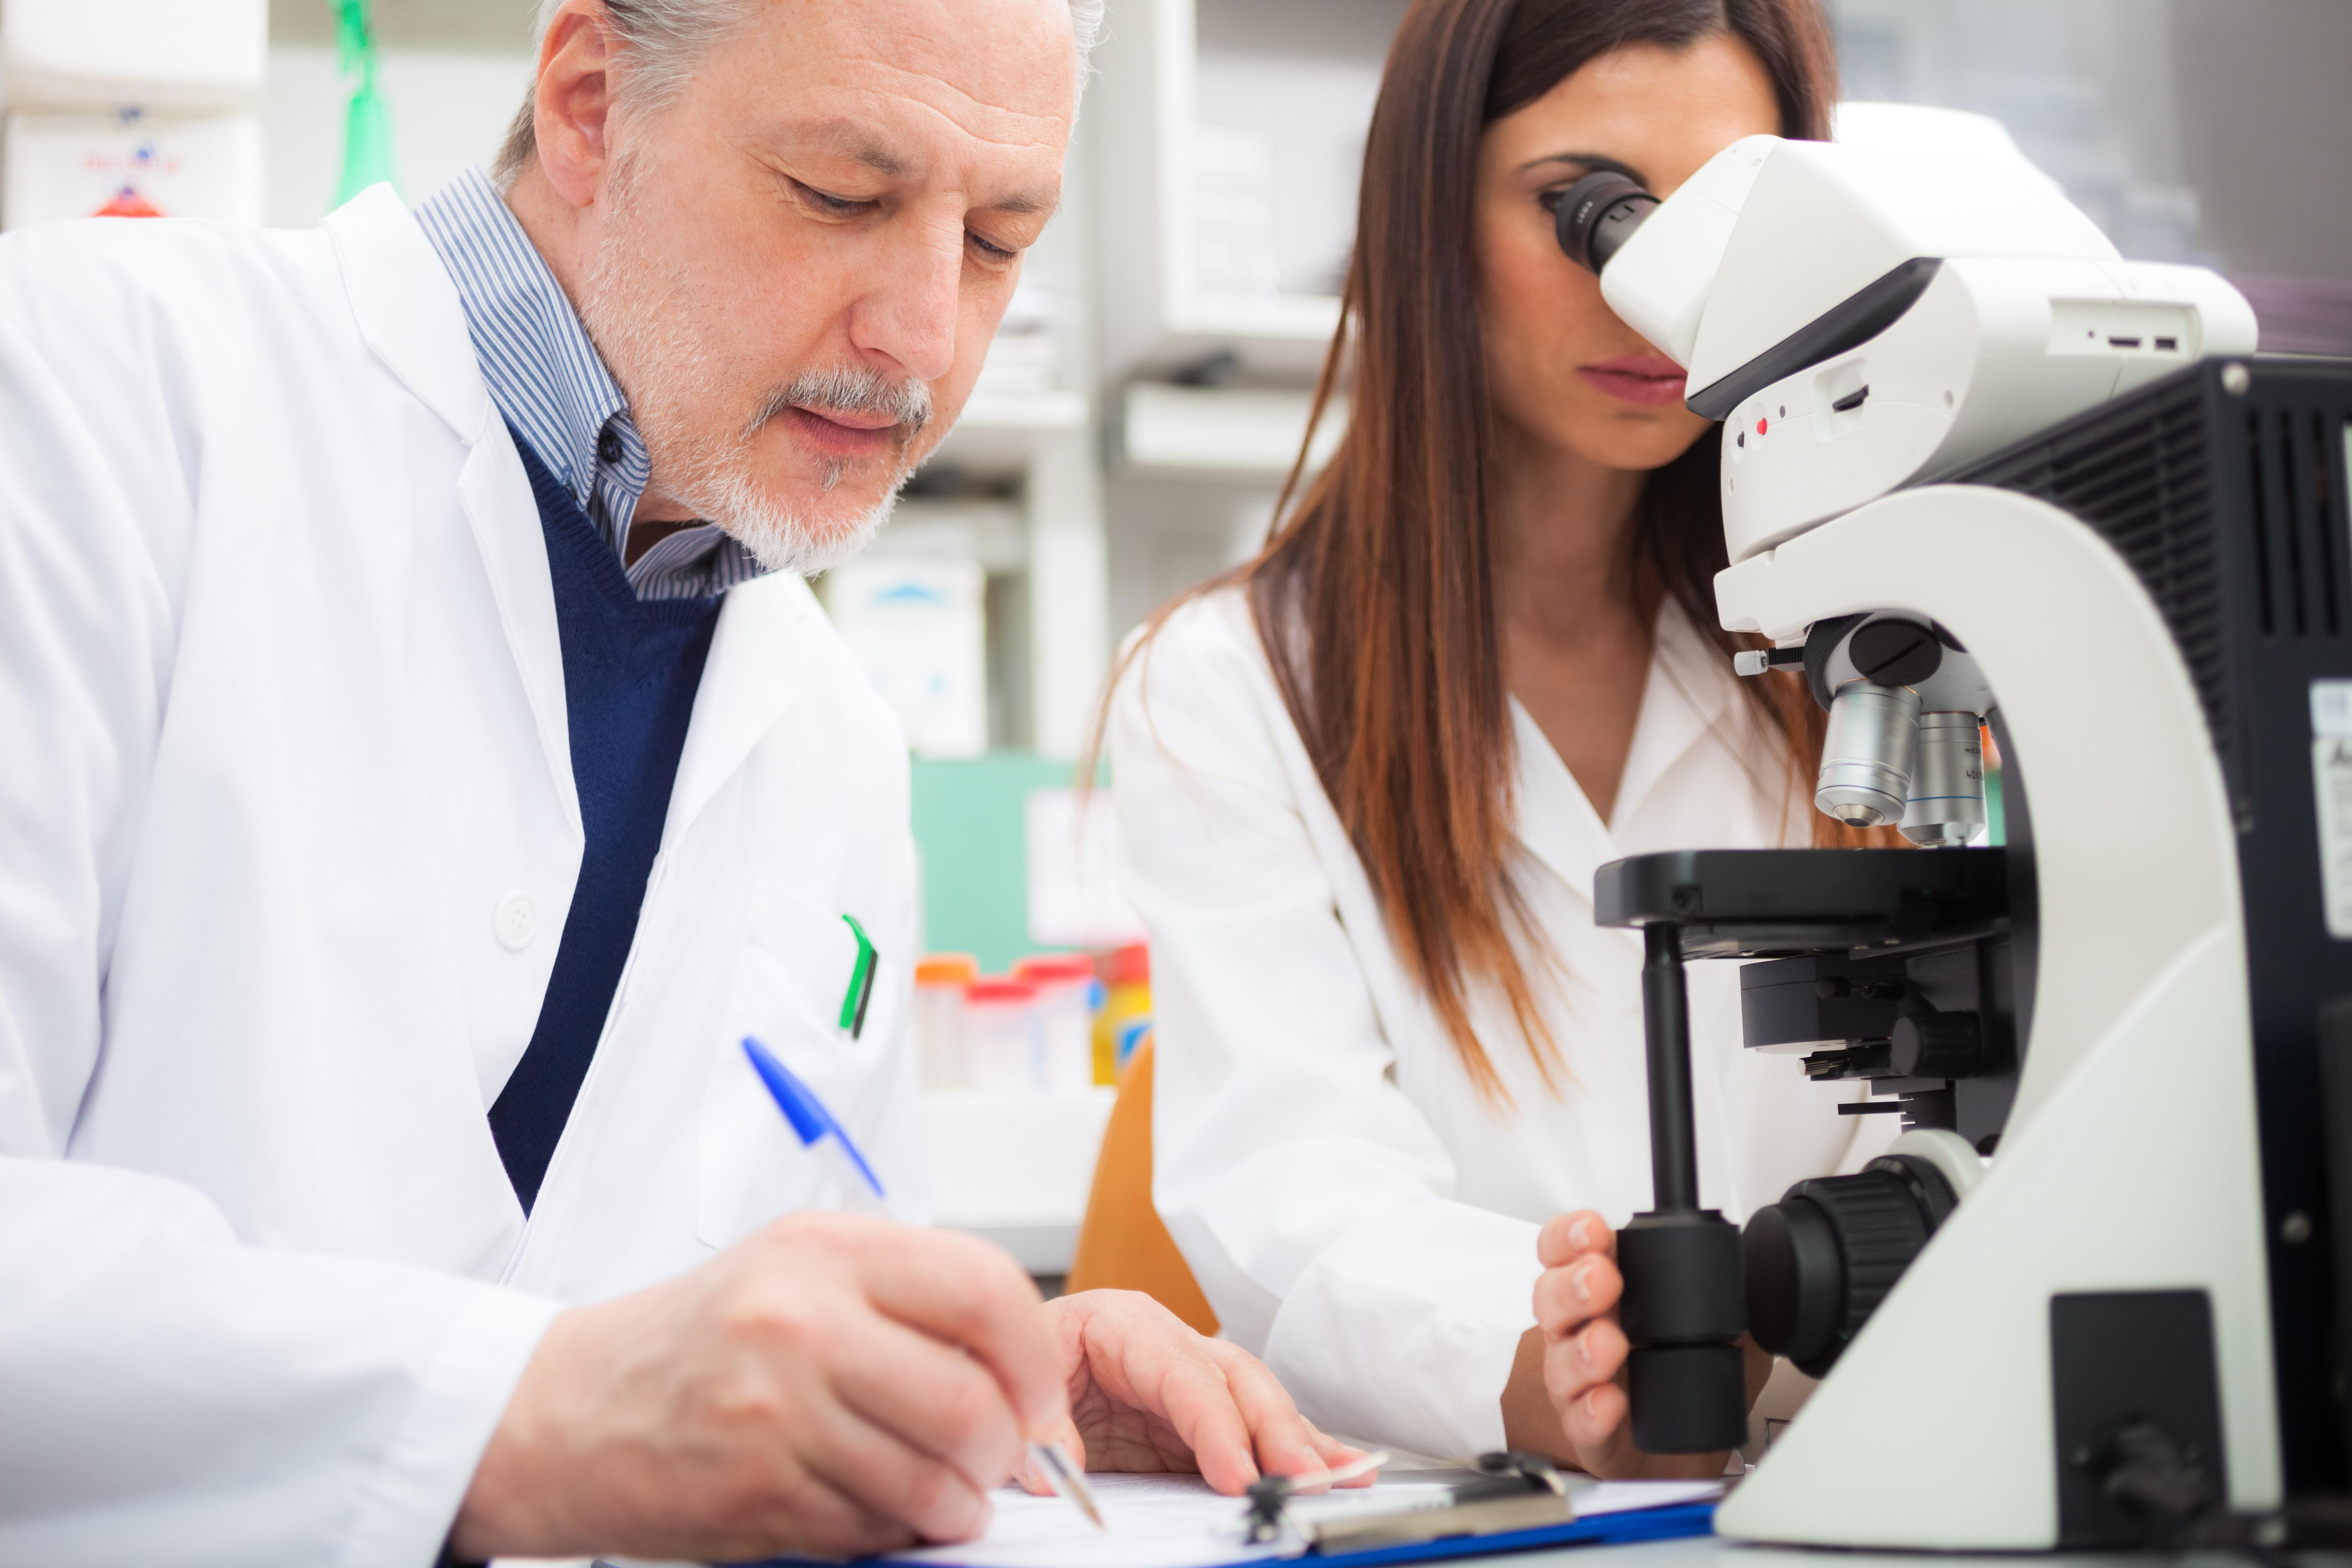 Male and female scientists use microscope while male takes notes